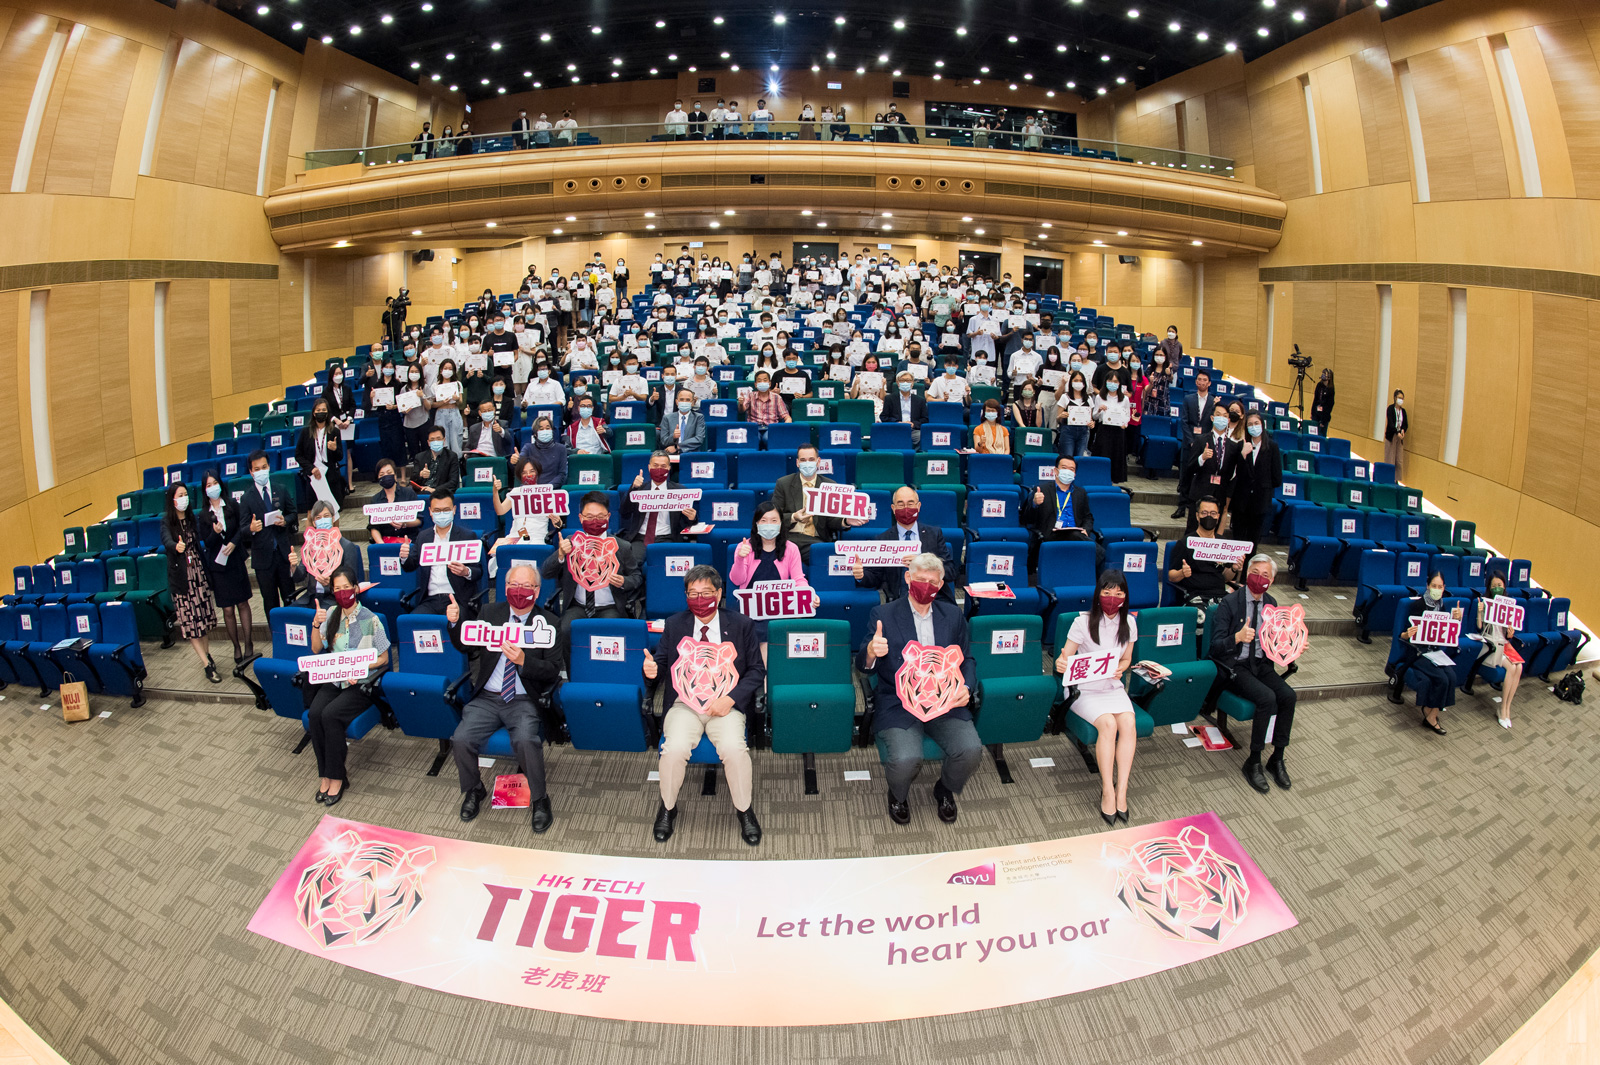 About 200 HK TECH Tiger students are welcomed in the ceremony.